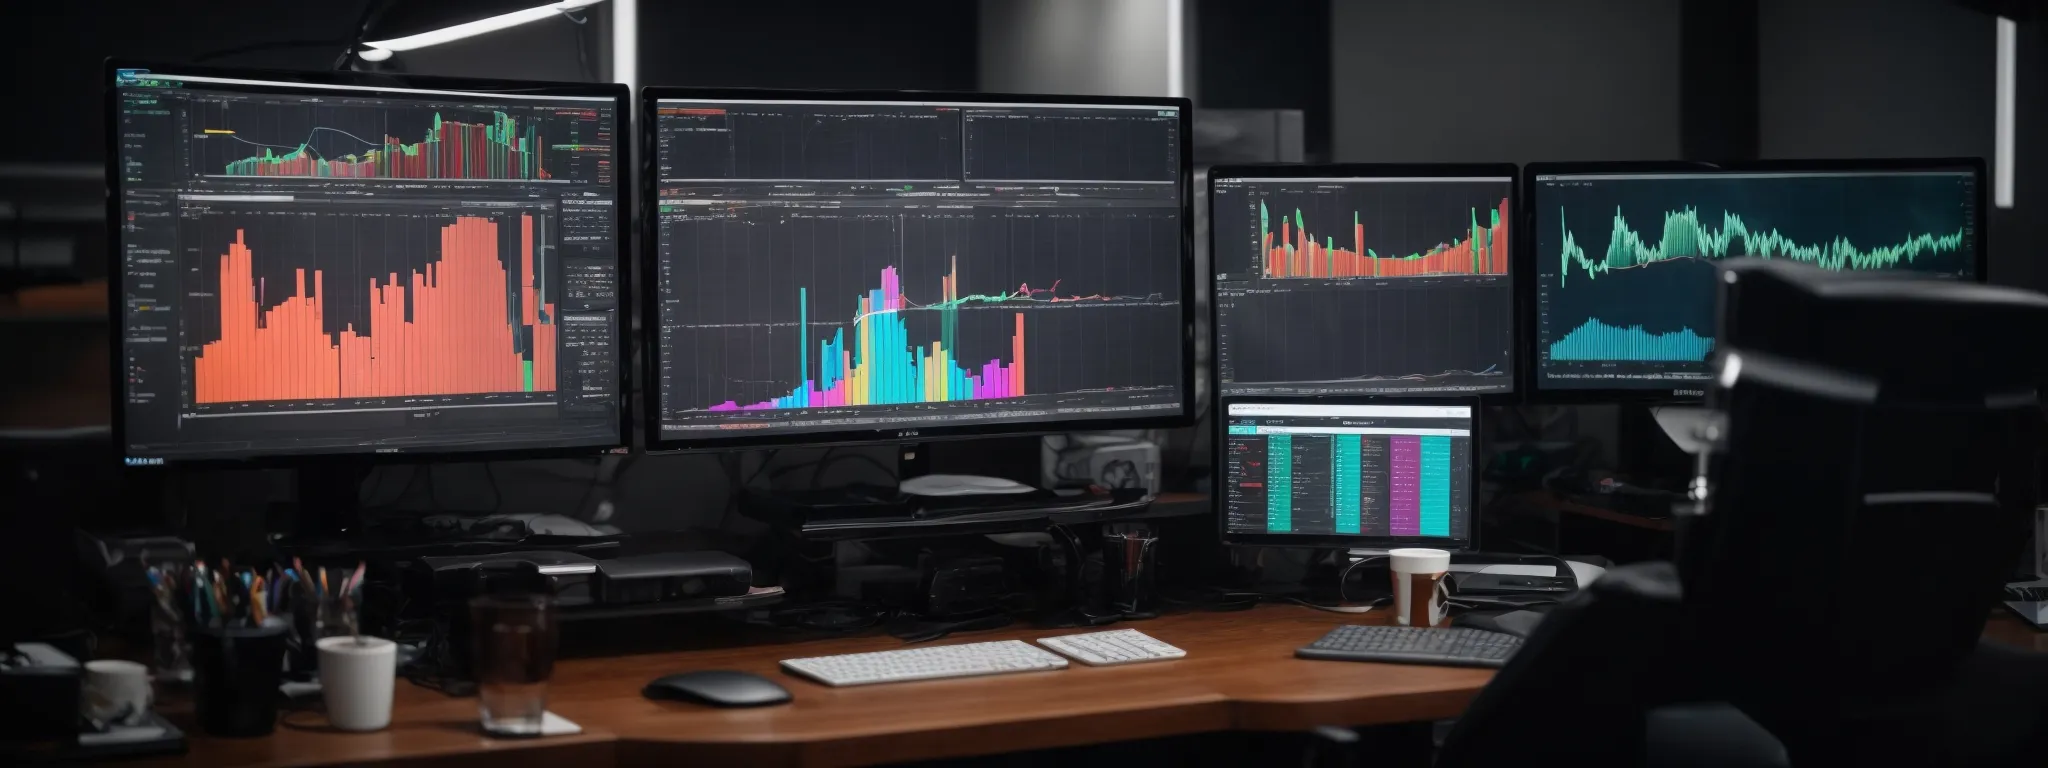 a person sits at a modern desk with dual monitors displaying colorful graphs and analytics, indicating active strategy planning for video seo optimization.